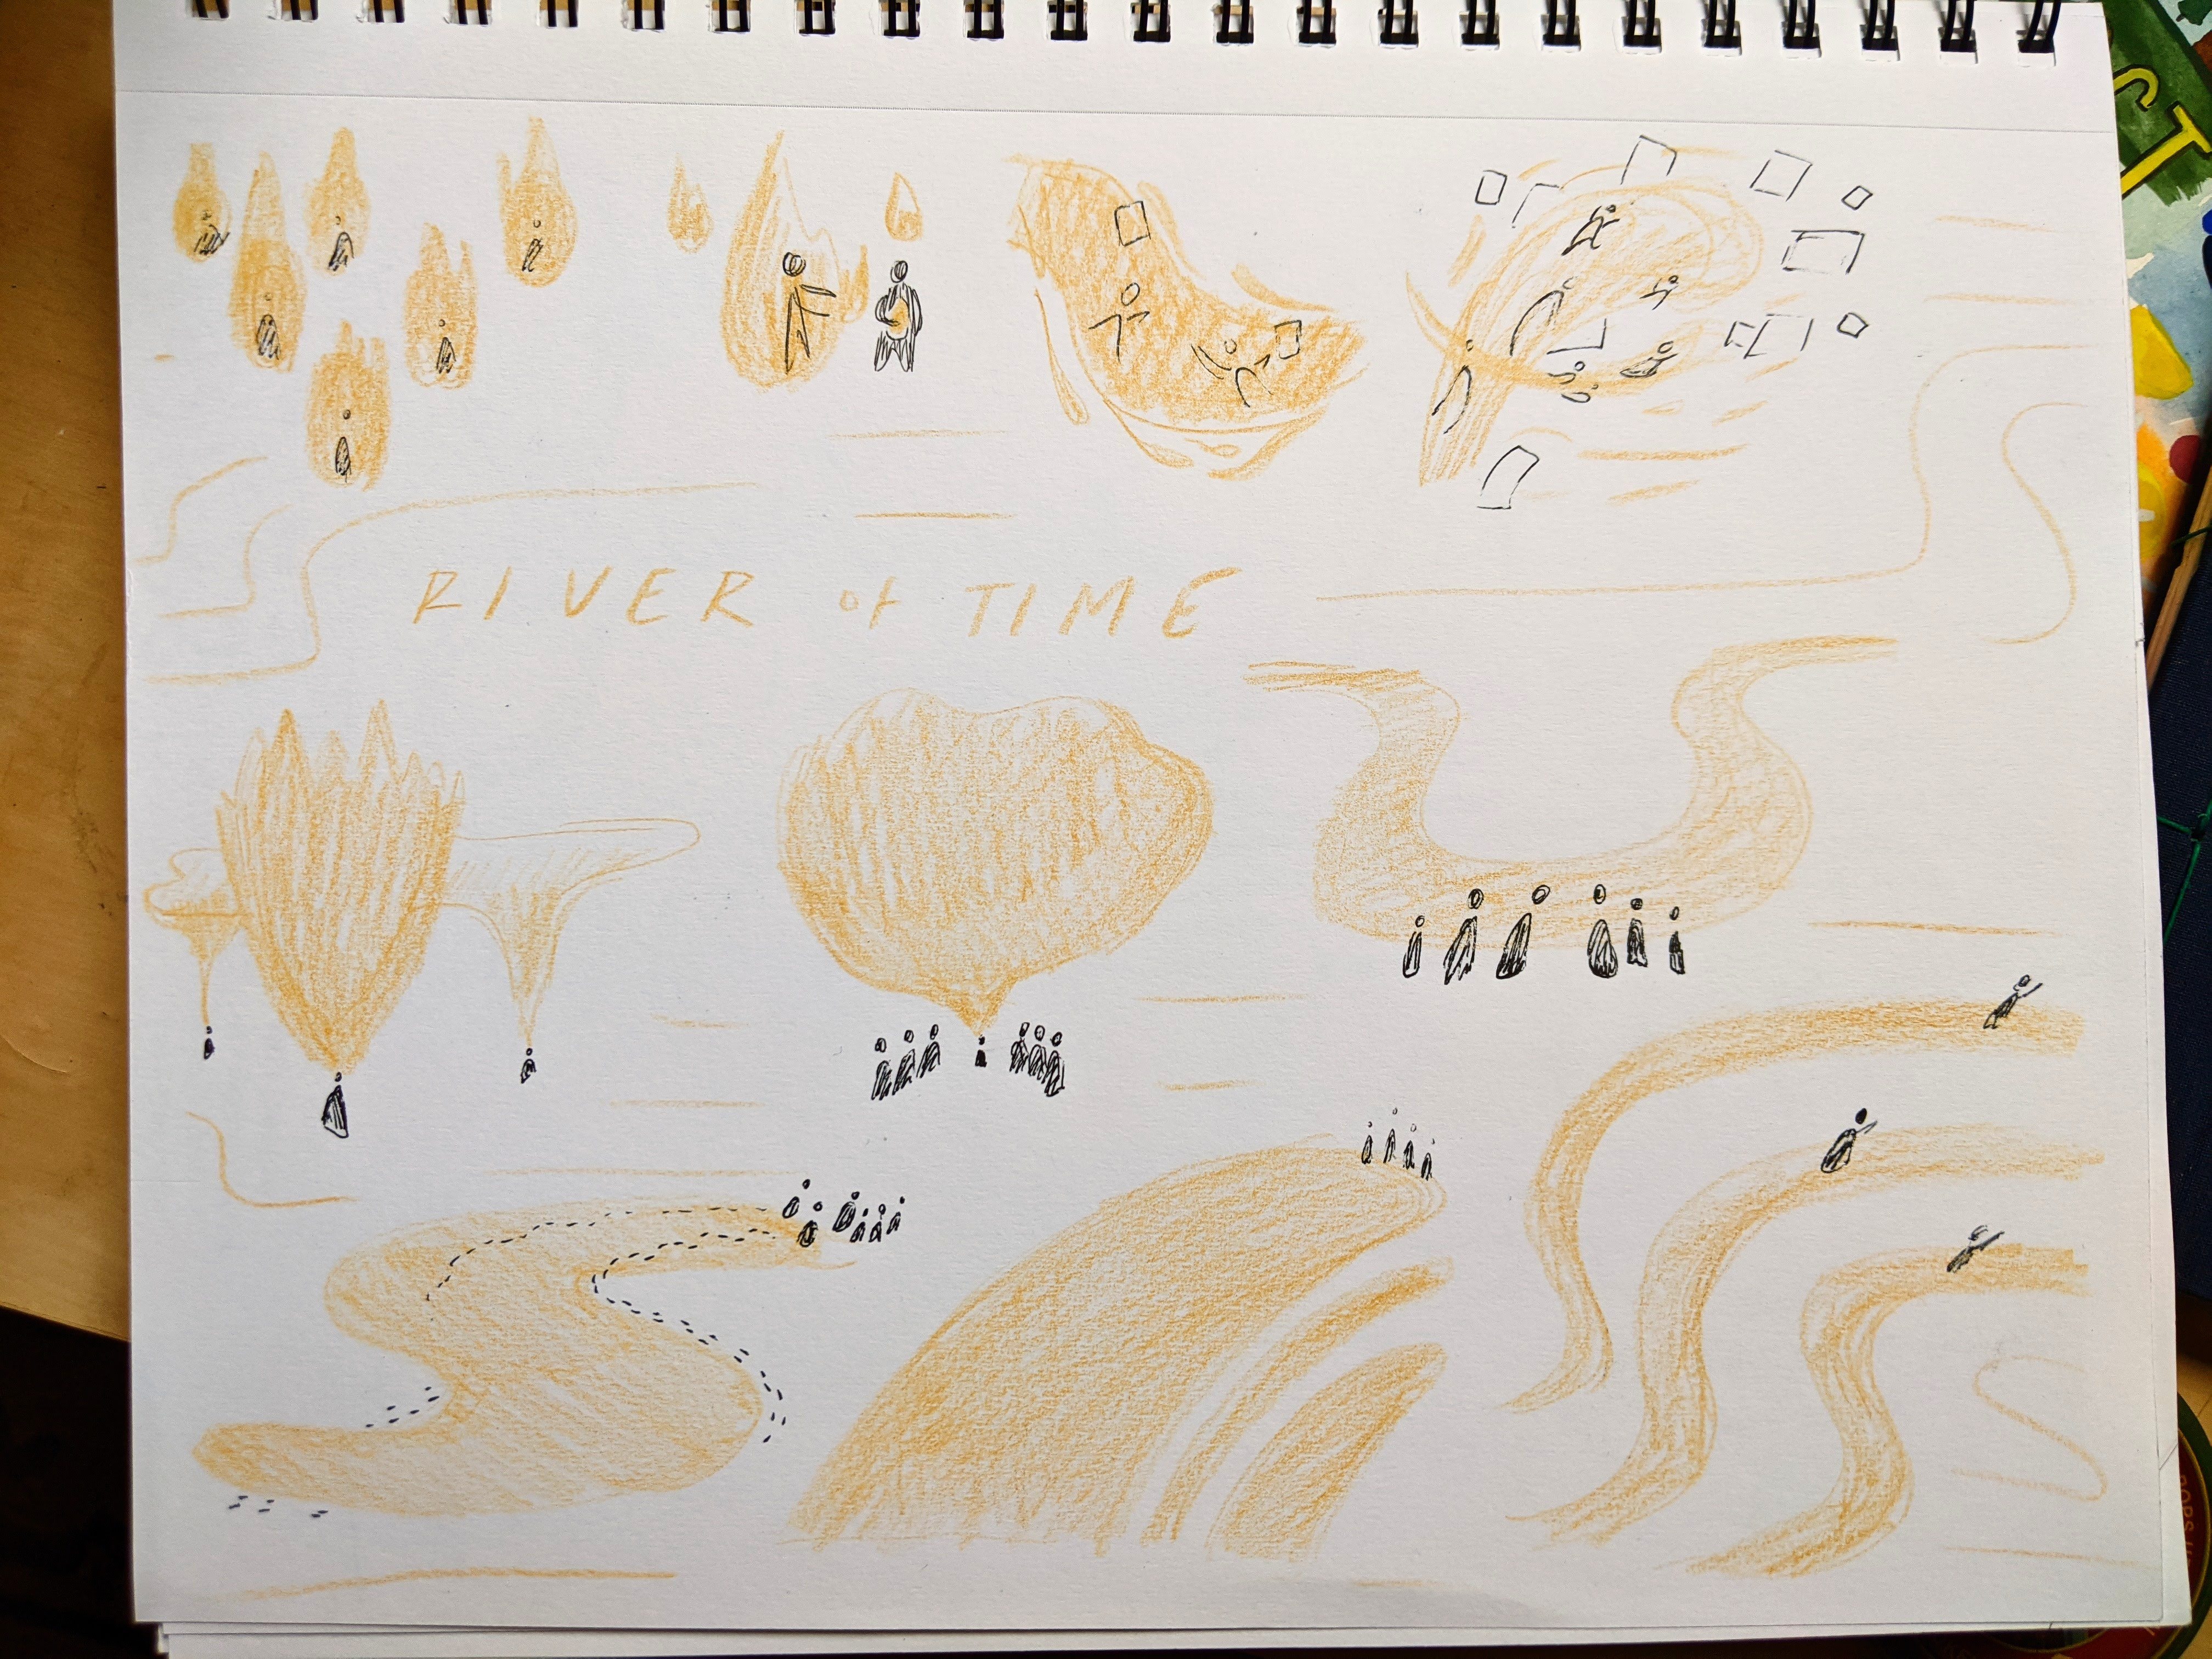 sketchbook page labeled 'River of Time' with sketches of icons with small figures and watery/wavey shapes